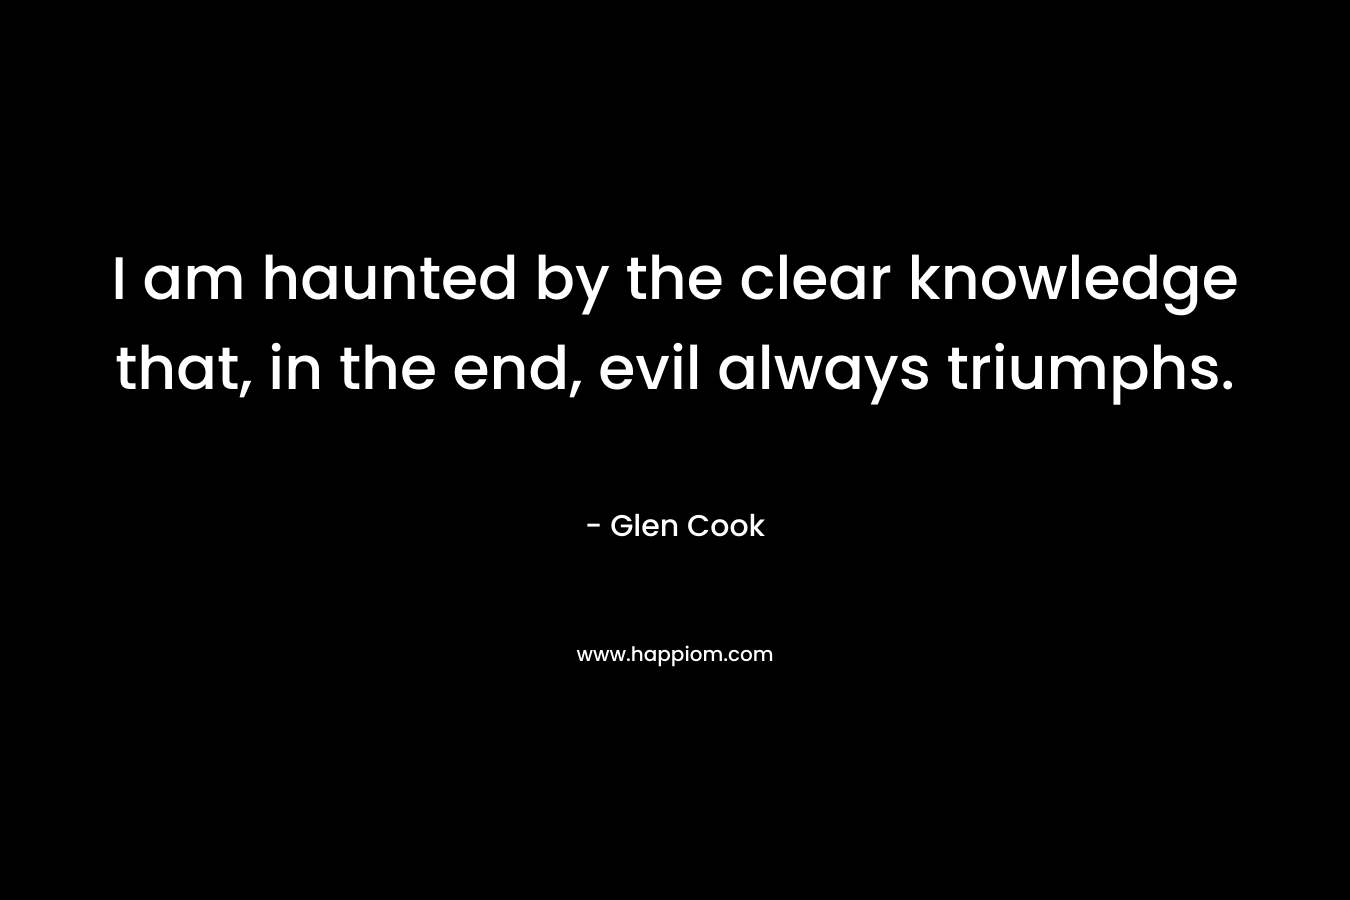 I am haunted by the clear knowledge that, in the end, evil always triumphs. – Glen Cook